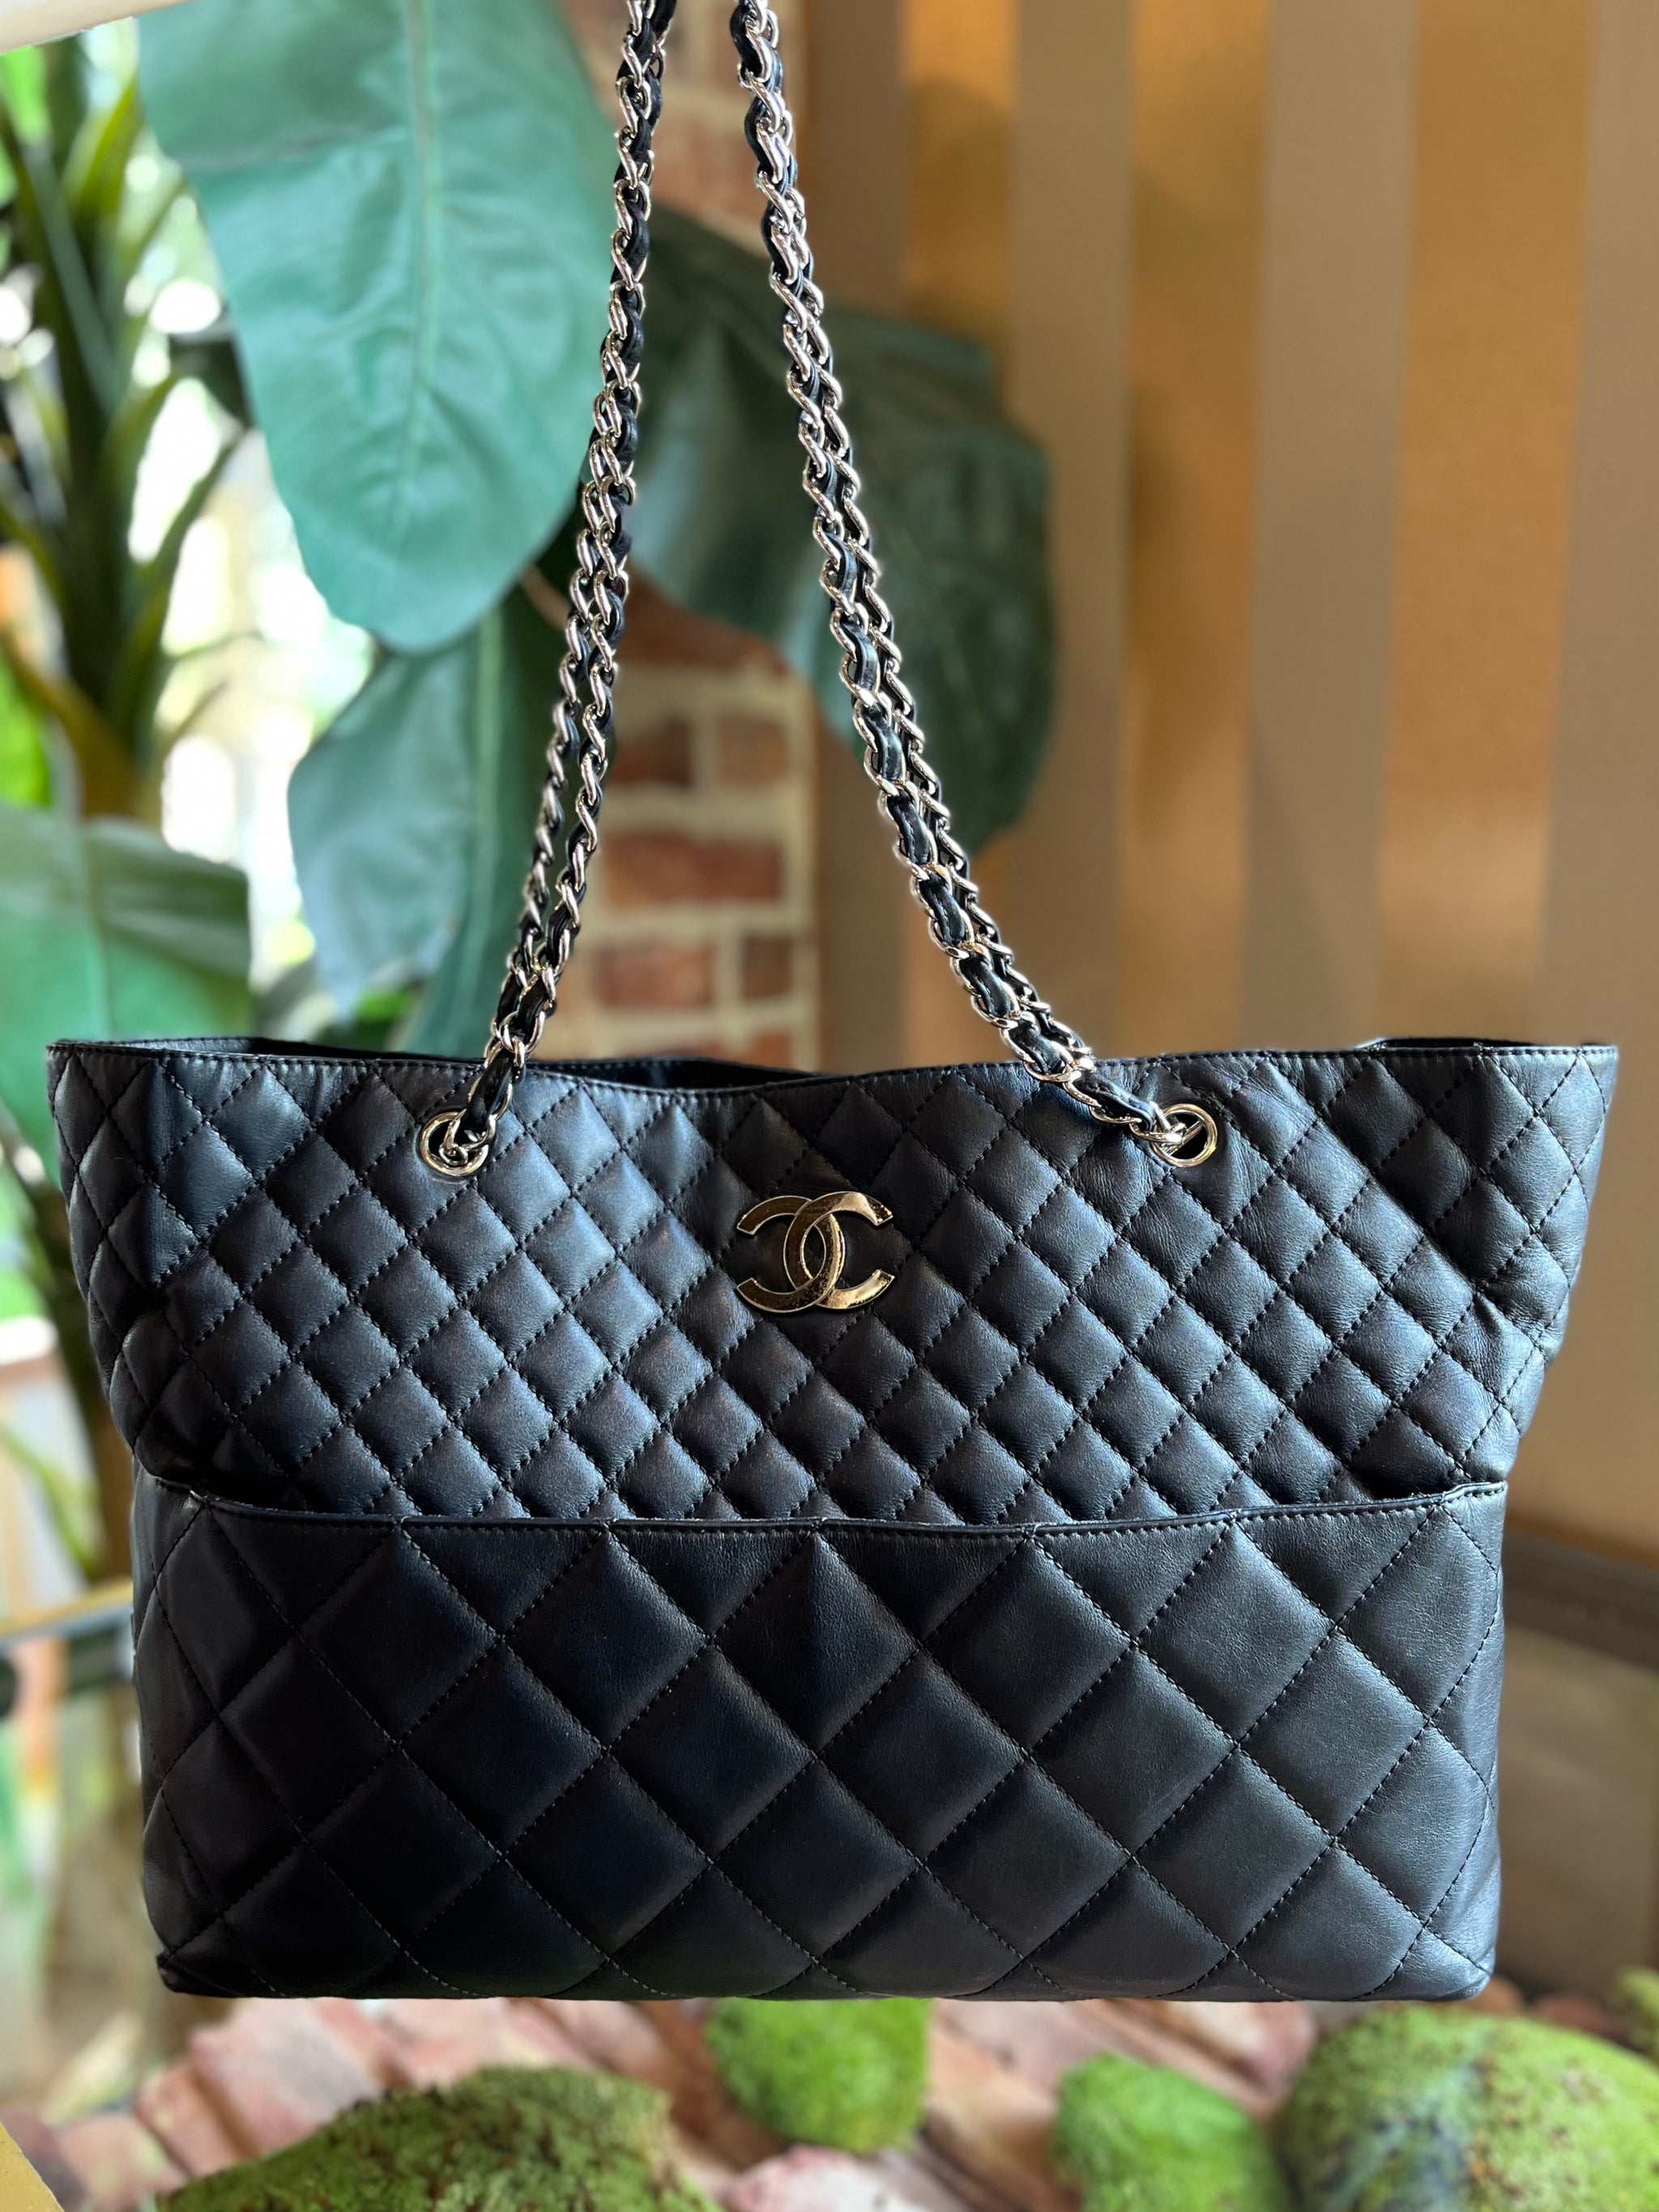 Chanel - Authenticated Neo Soft Shopping Handbag - Leather Black Plain for Women, Good Condition